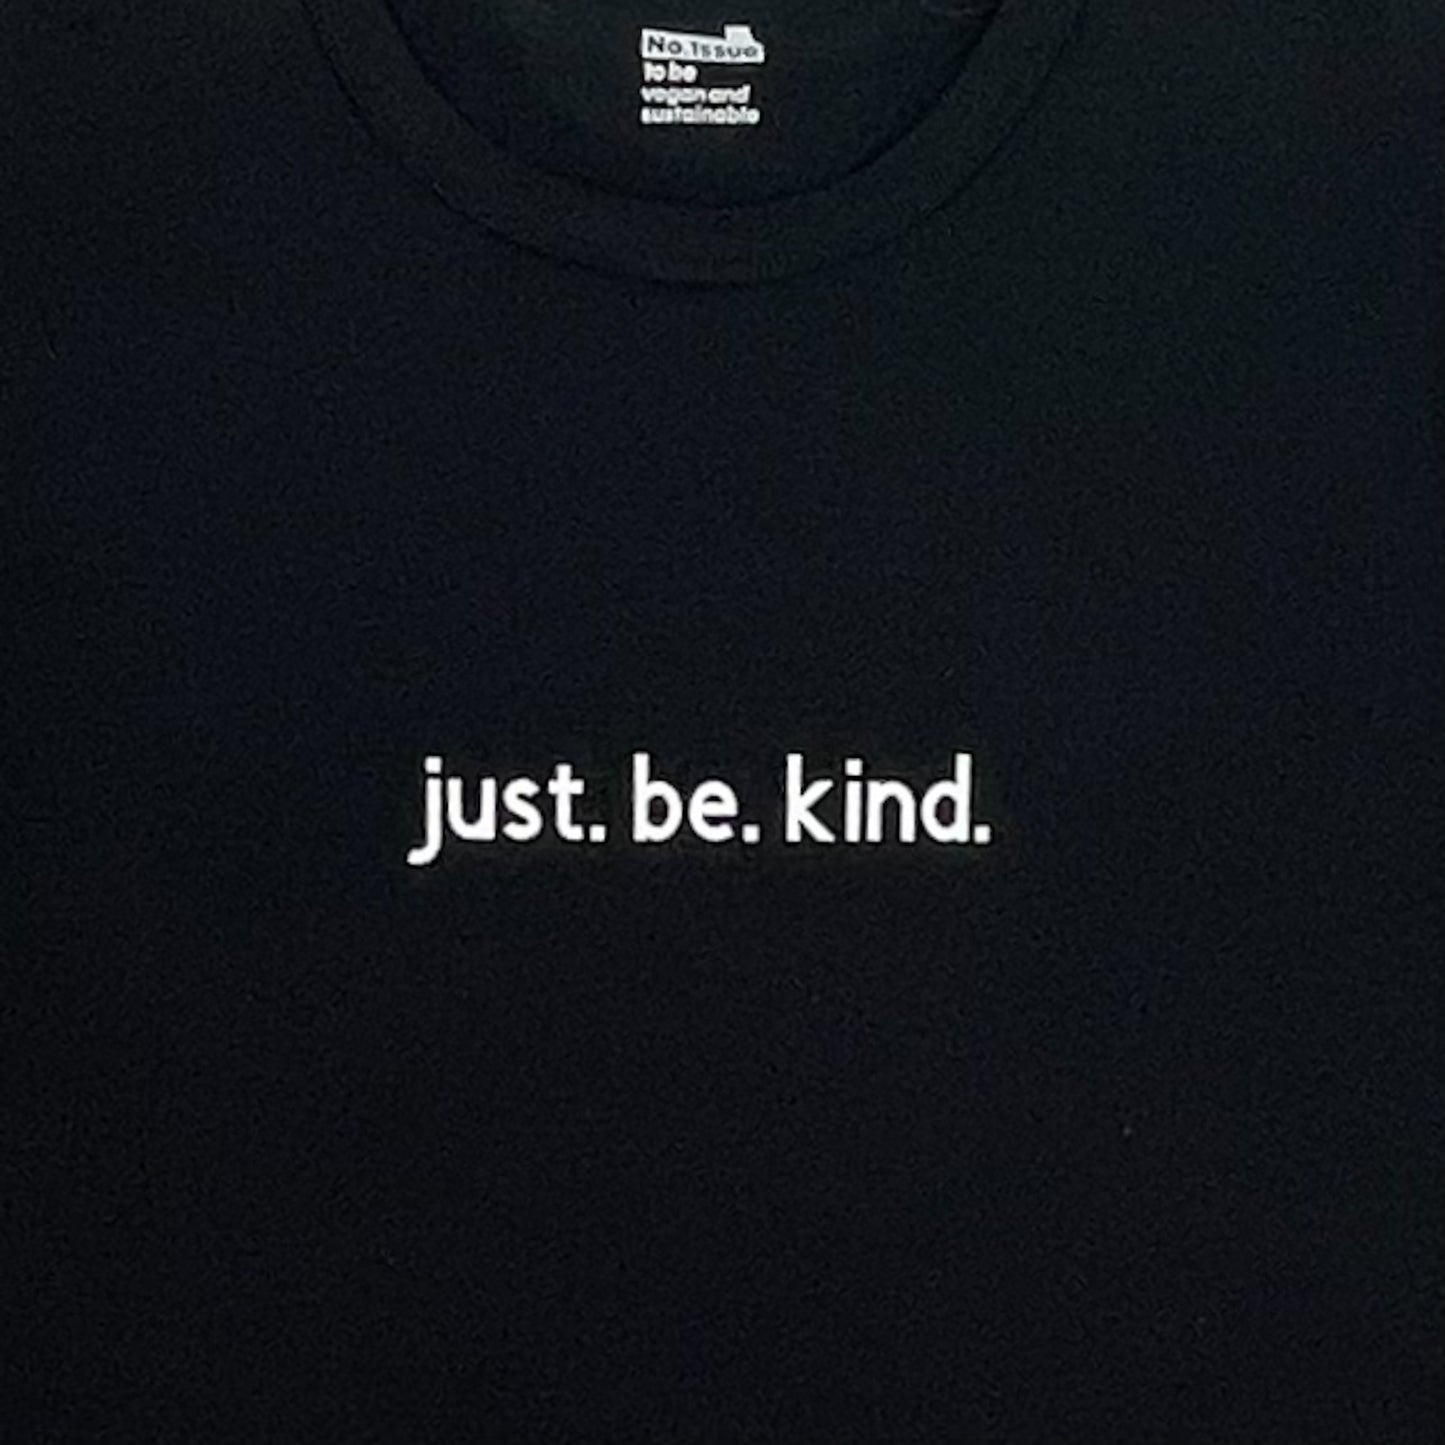 T-shirt just. be. kind.